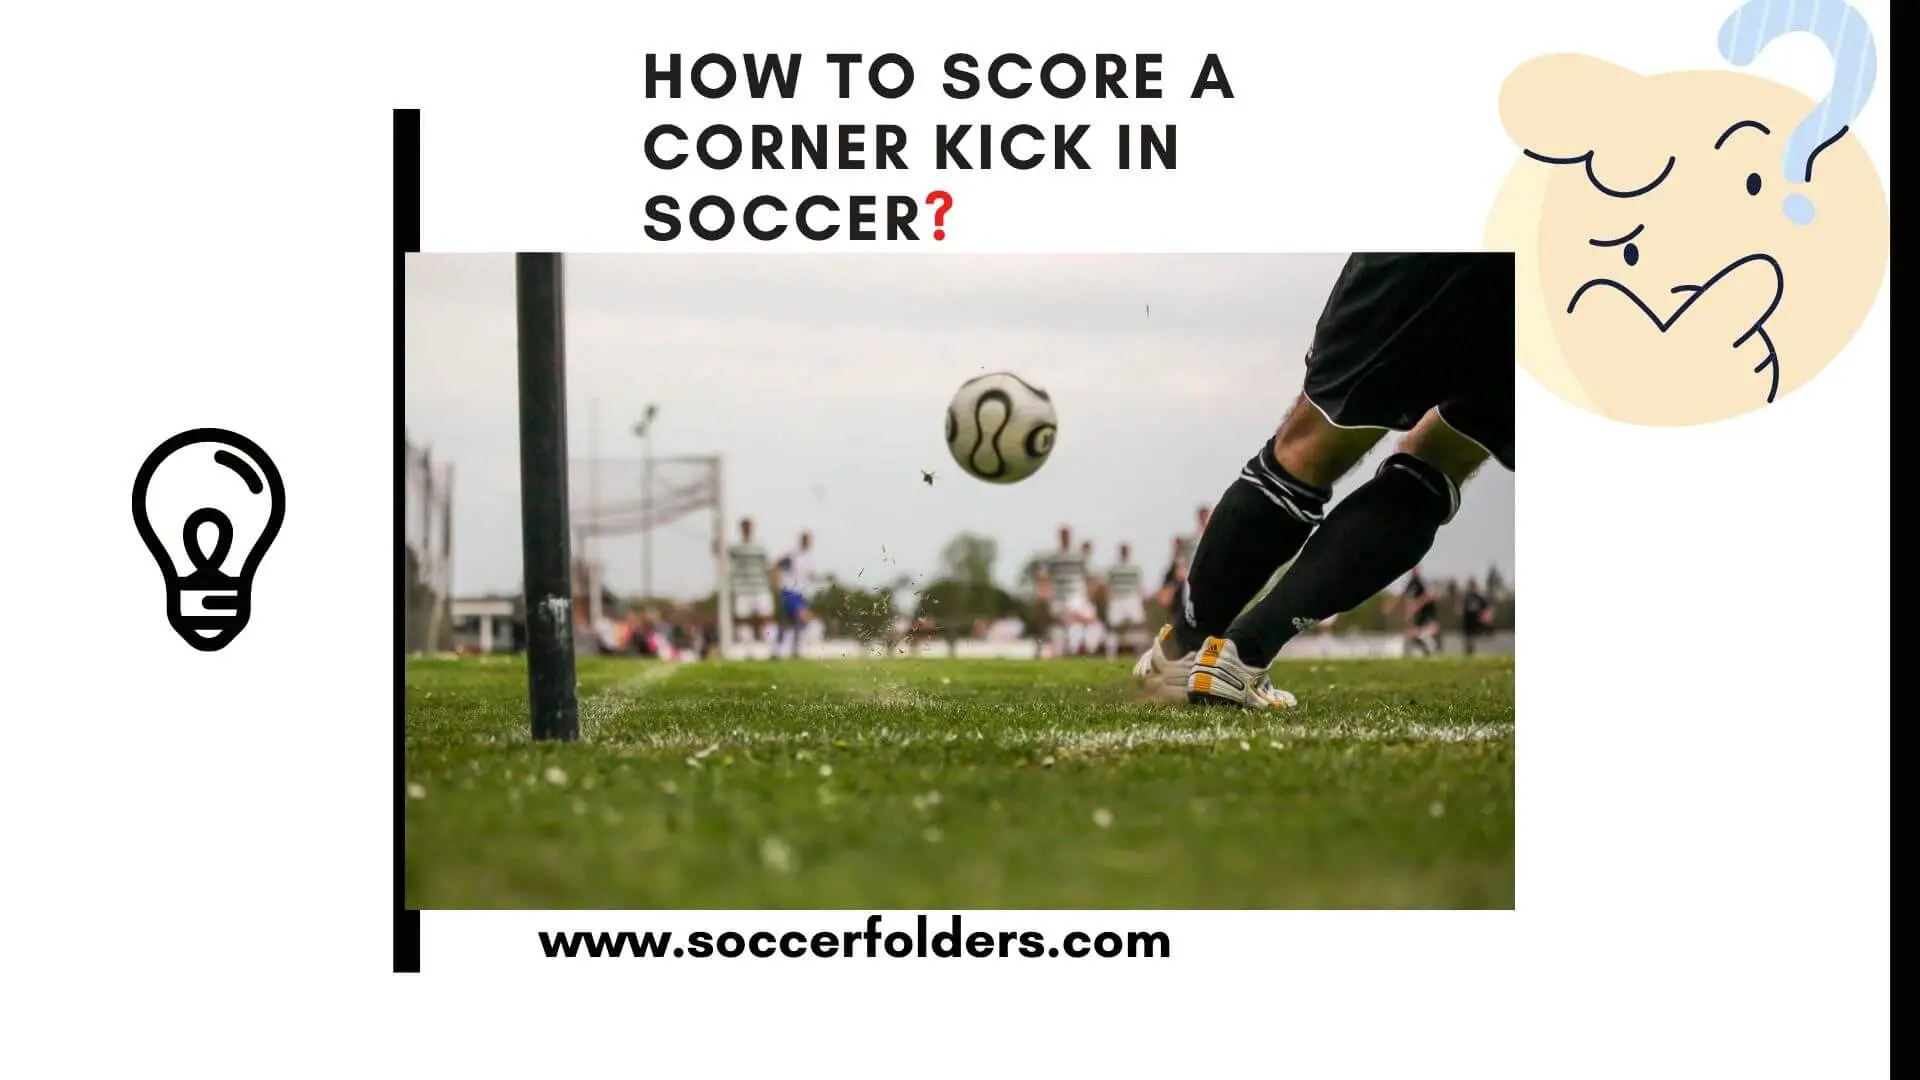 How to score a corner kick - Featured Image